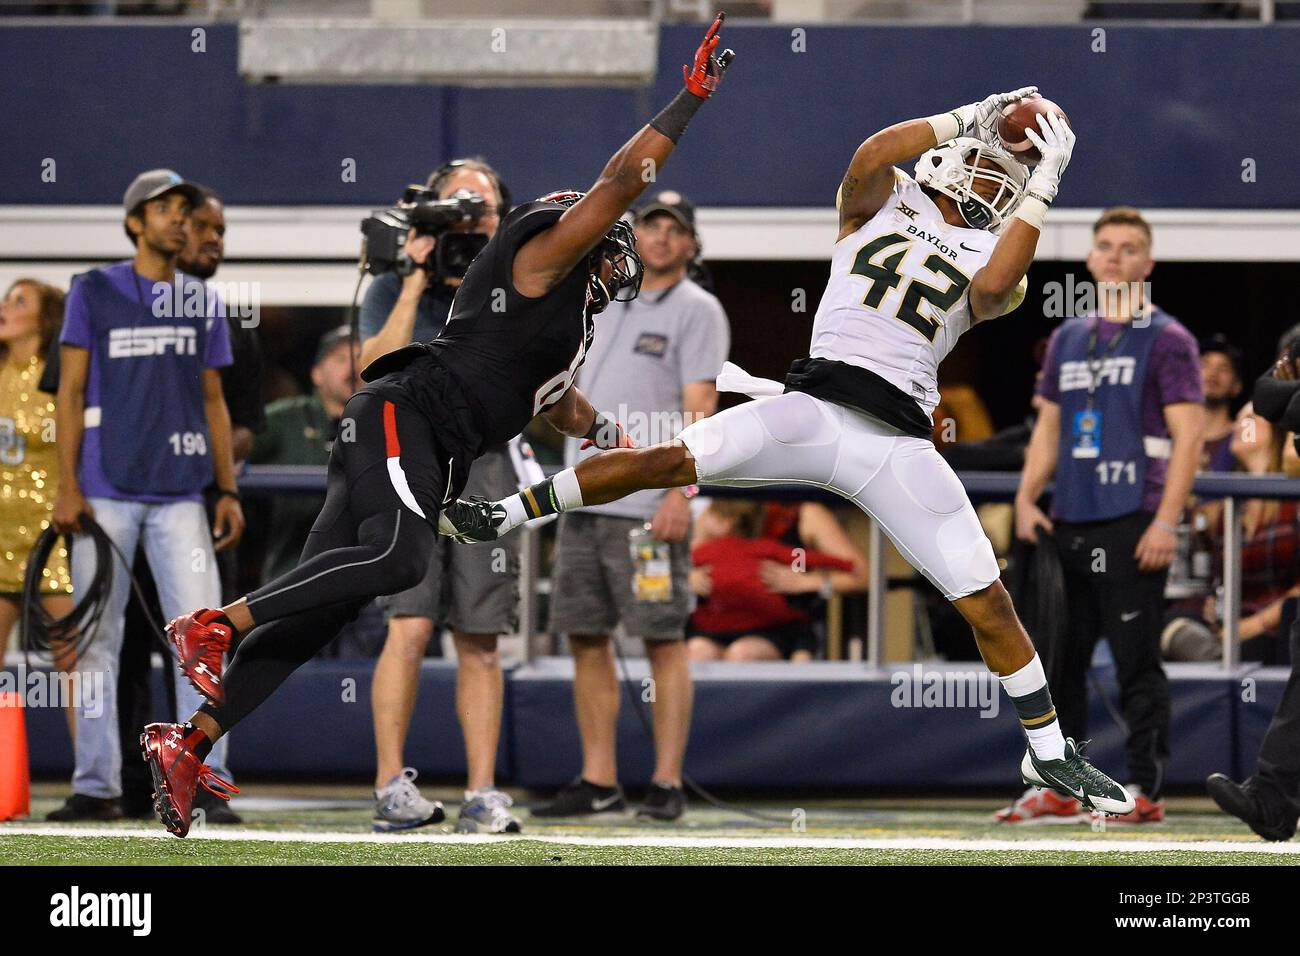 Baylor inside receiver Levi Norwood (42) catches a pass while defended by  Texas Tech defensive back Austin Stewart (8) during an NCAA Football game,  Saturday, November 29, 2014 in Arlington, Tex. Baylor